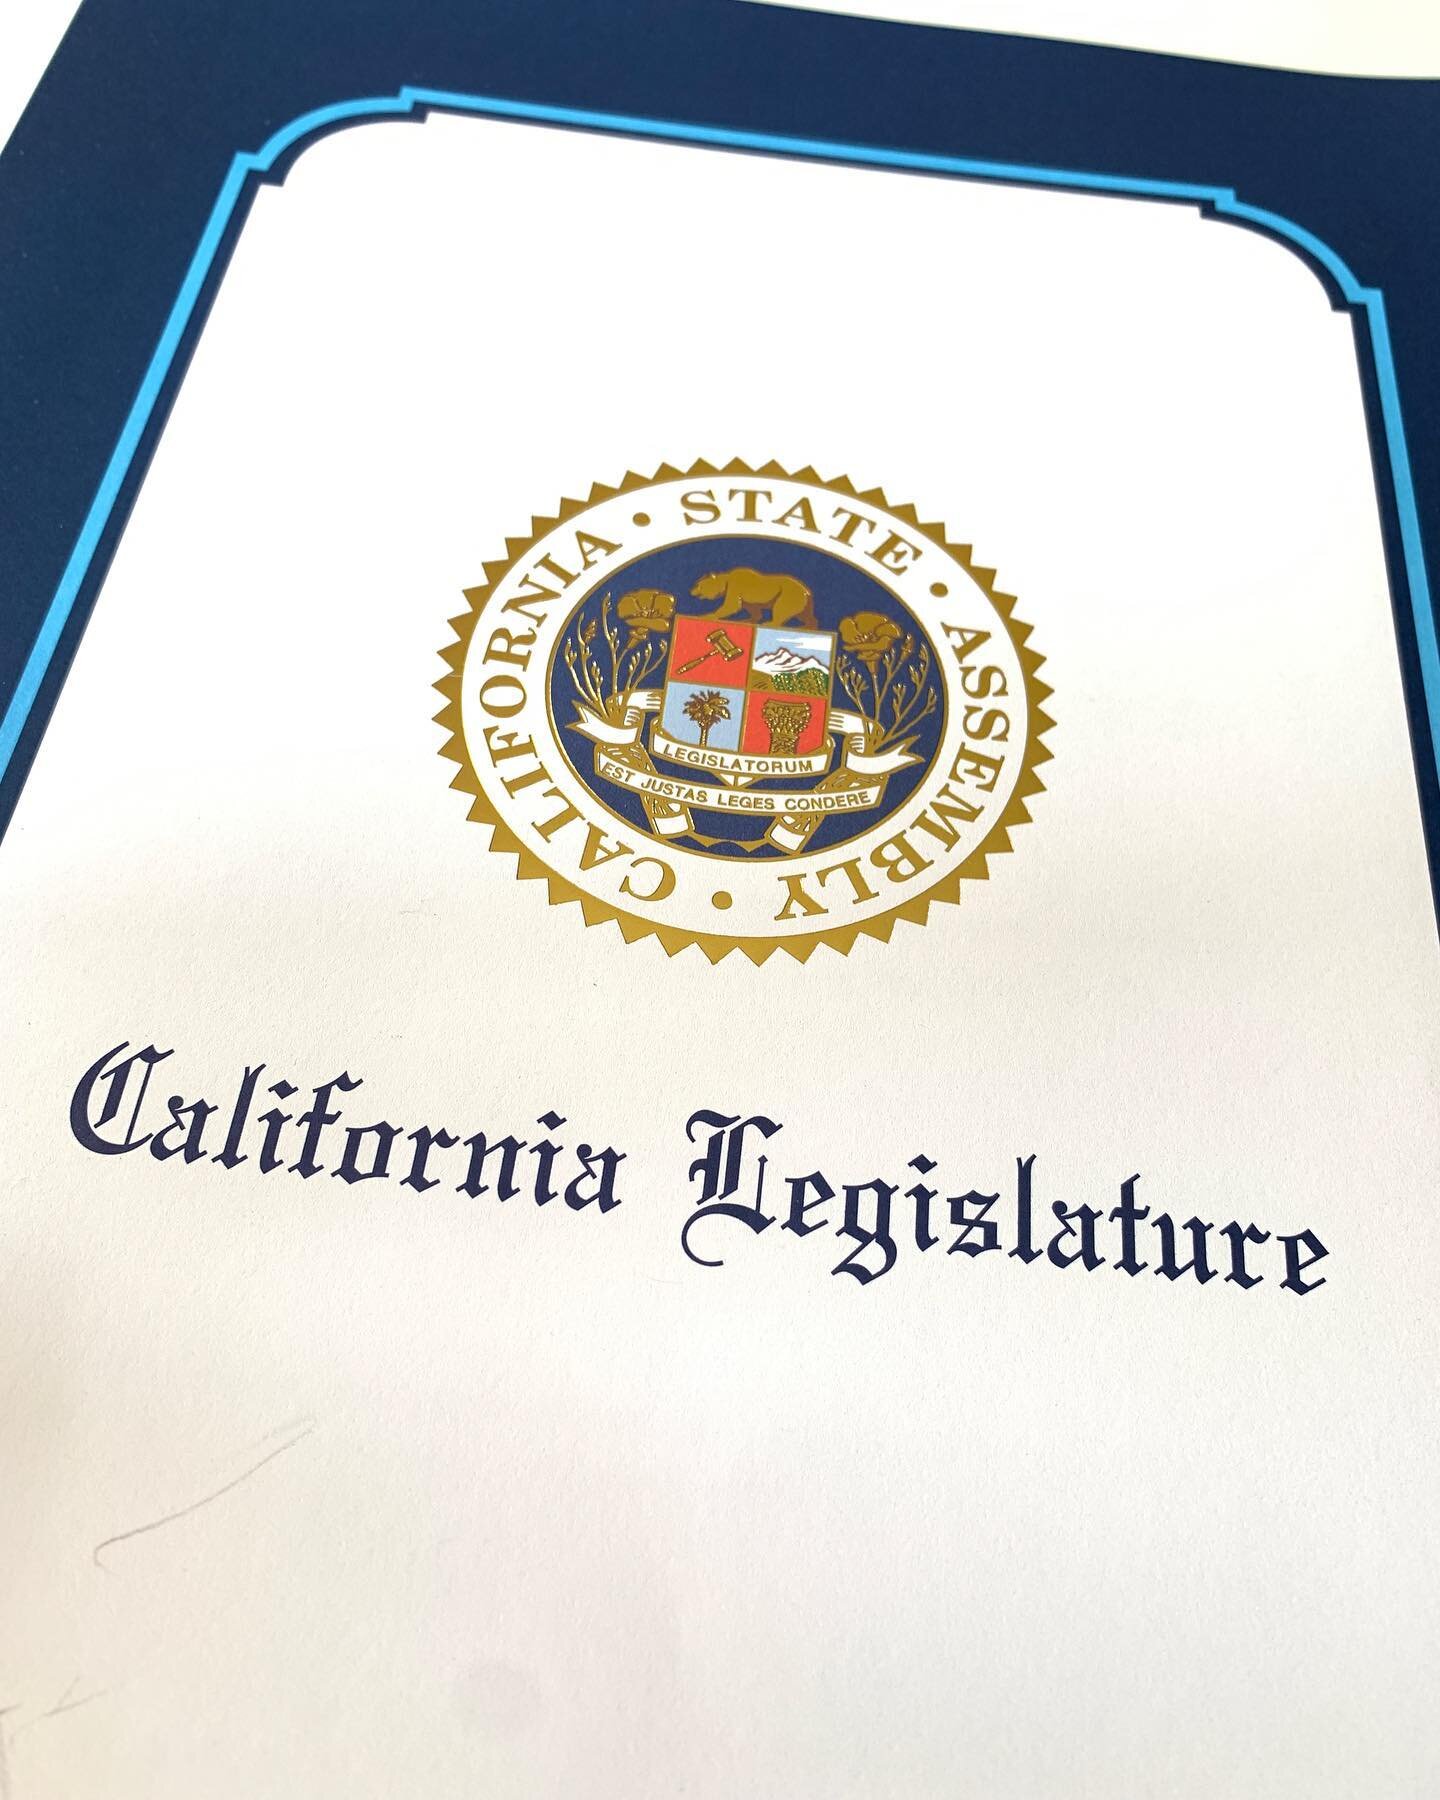 It&rsquo;s graduation day for me and Class 34. Leadership Napa Valley has been an amazing experience. And what an honor to be recognized by the California State Legislature!
I&rsquo;ll share more about LNV in the days and weeks to come.